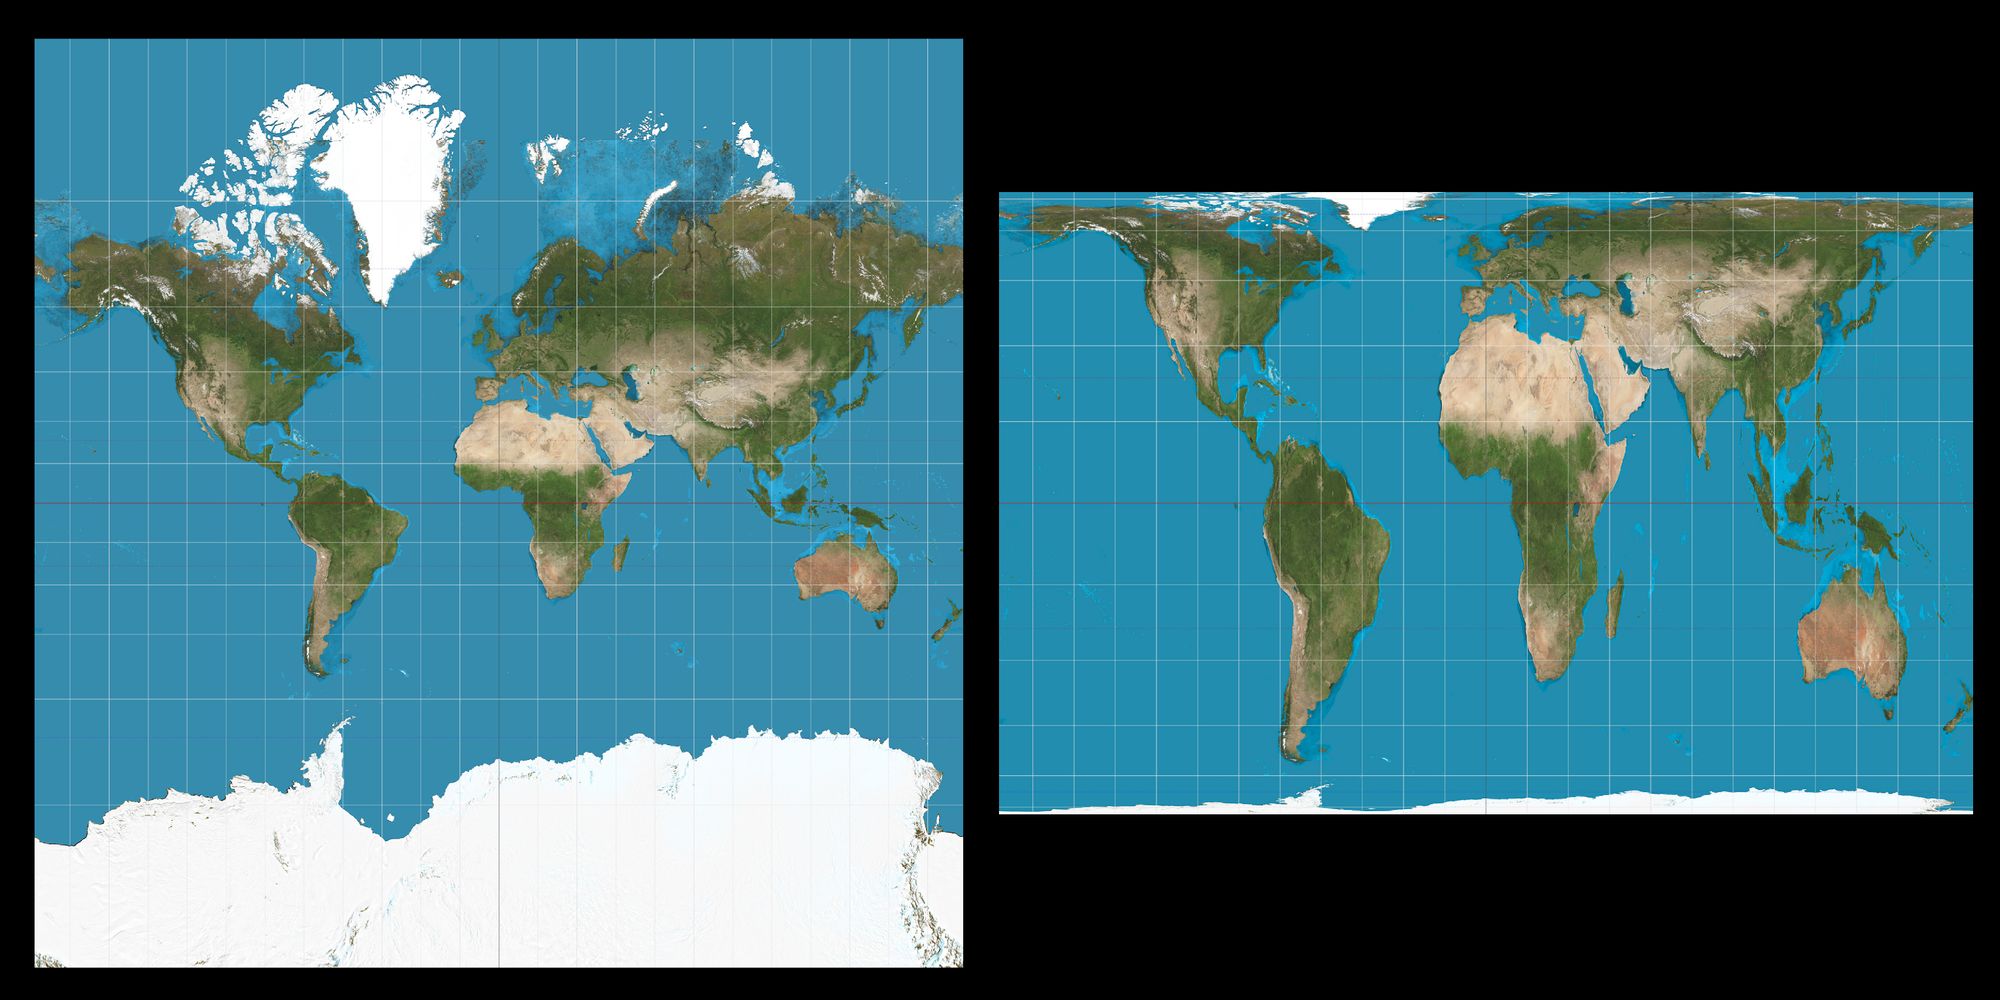 peterson projection map vs world